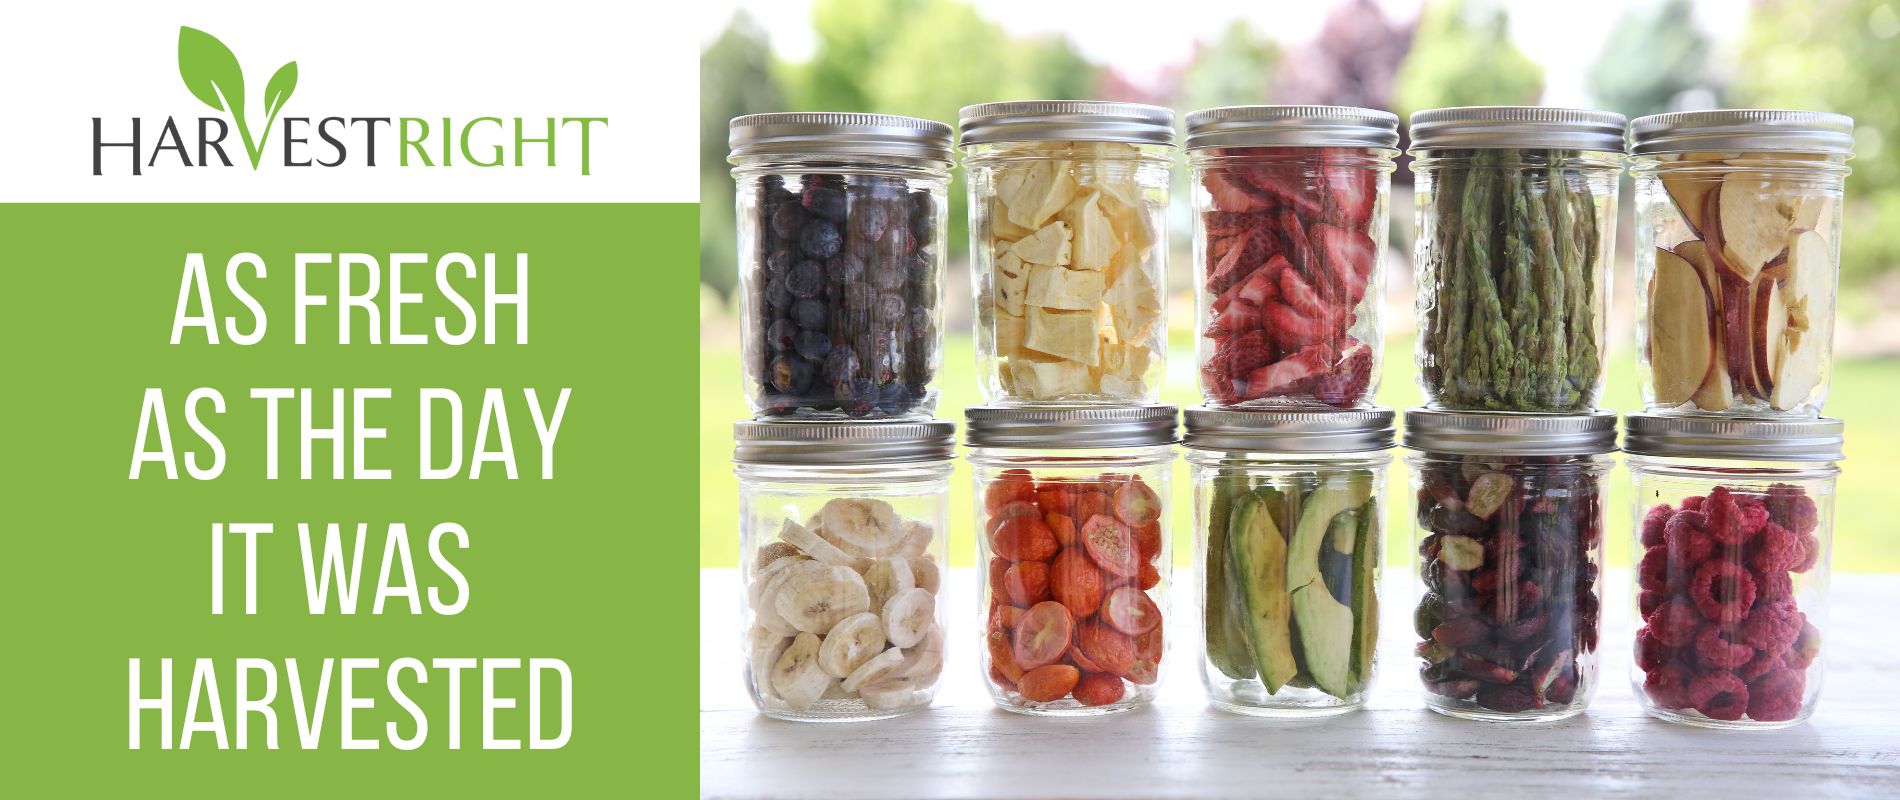 Freeze drying locks in both flavor and nutrition and can last for years, making freeze-dried food even better than fresh!